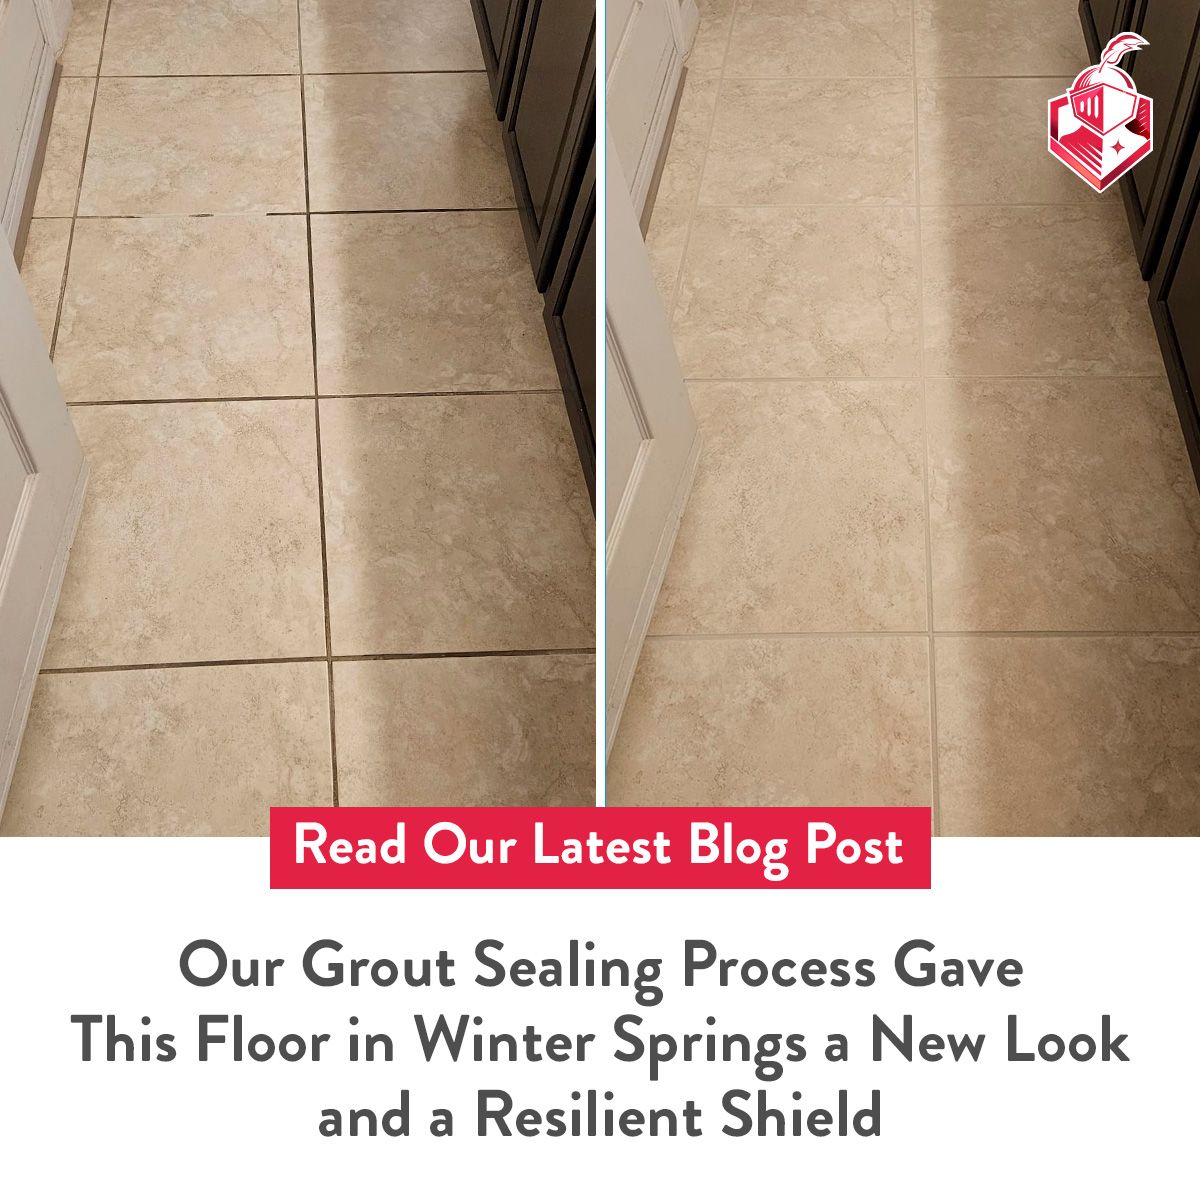 Our Grout Sealing Process Gave This Floor in Winter Springs a New Look and a Resilient Shield